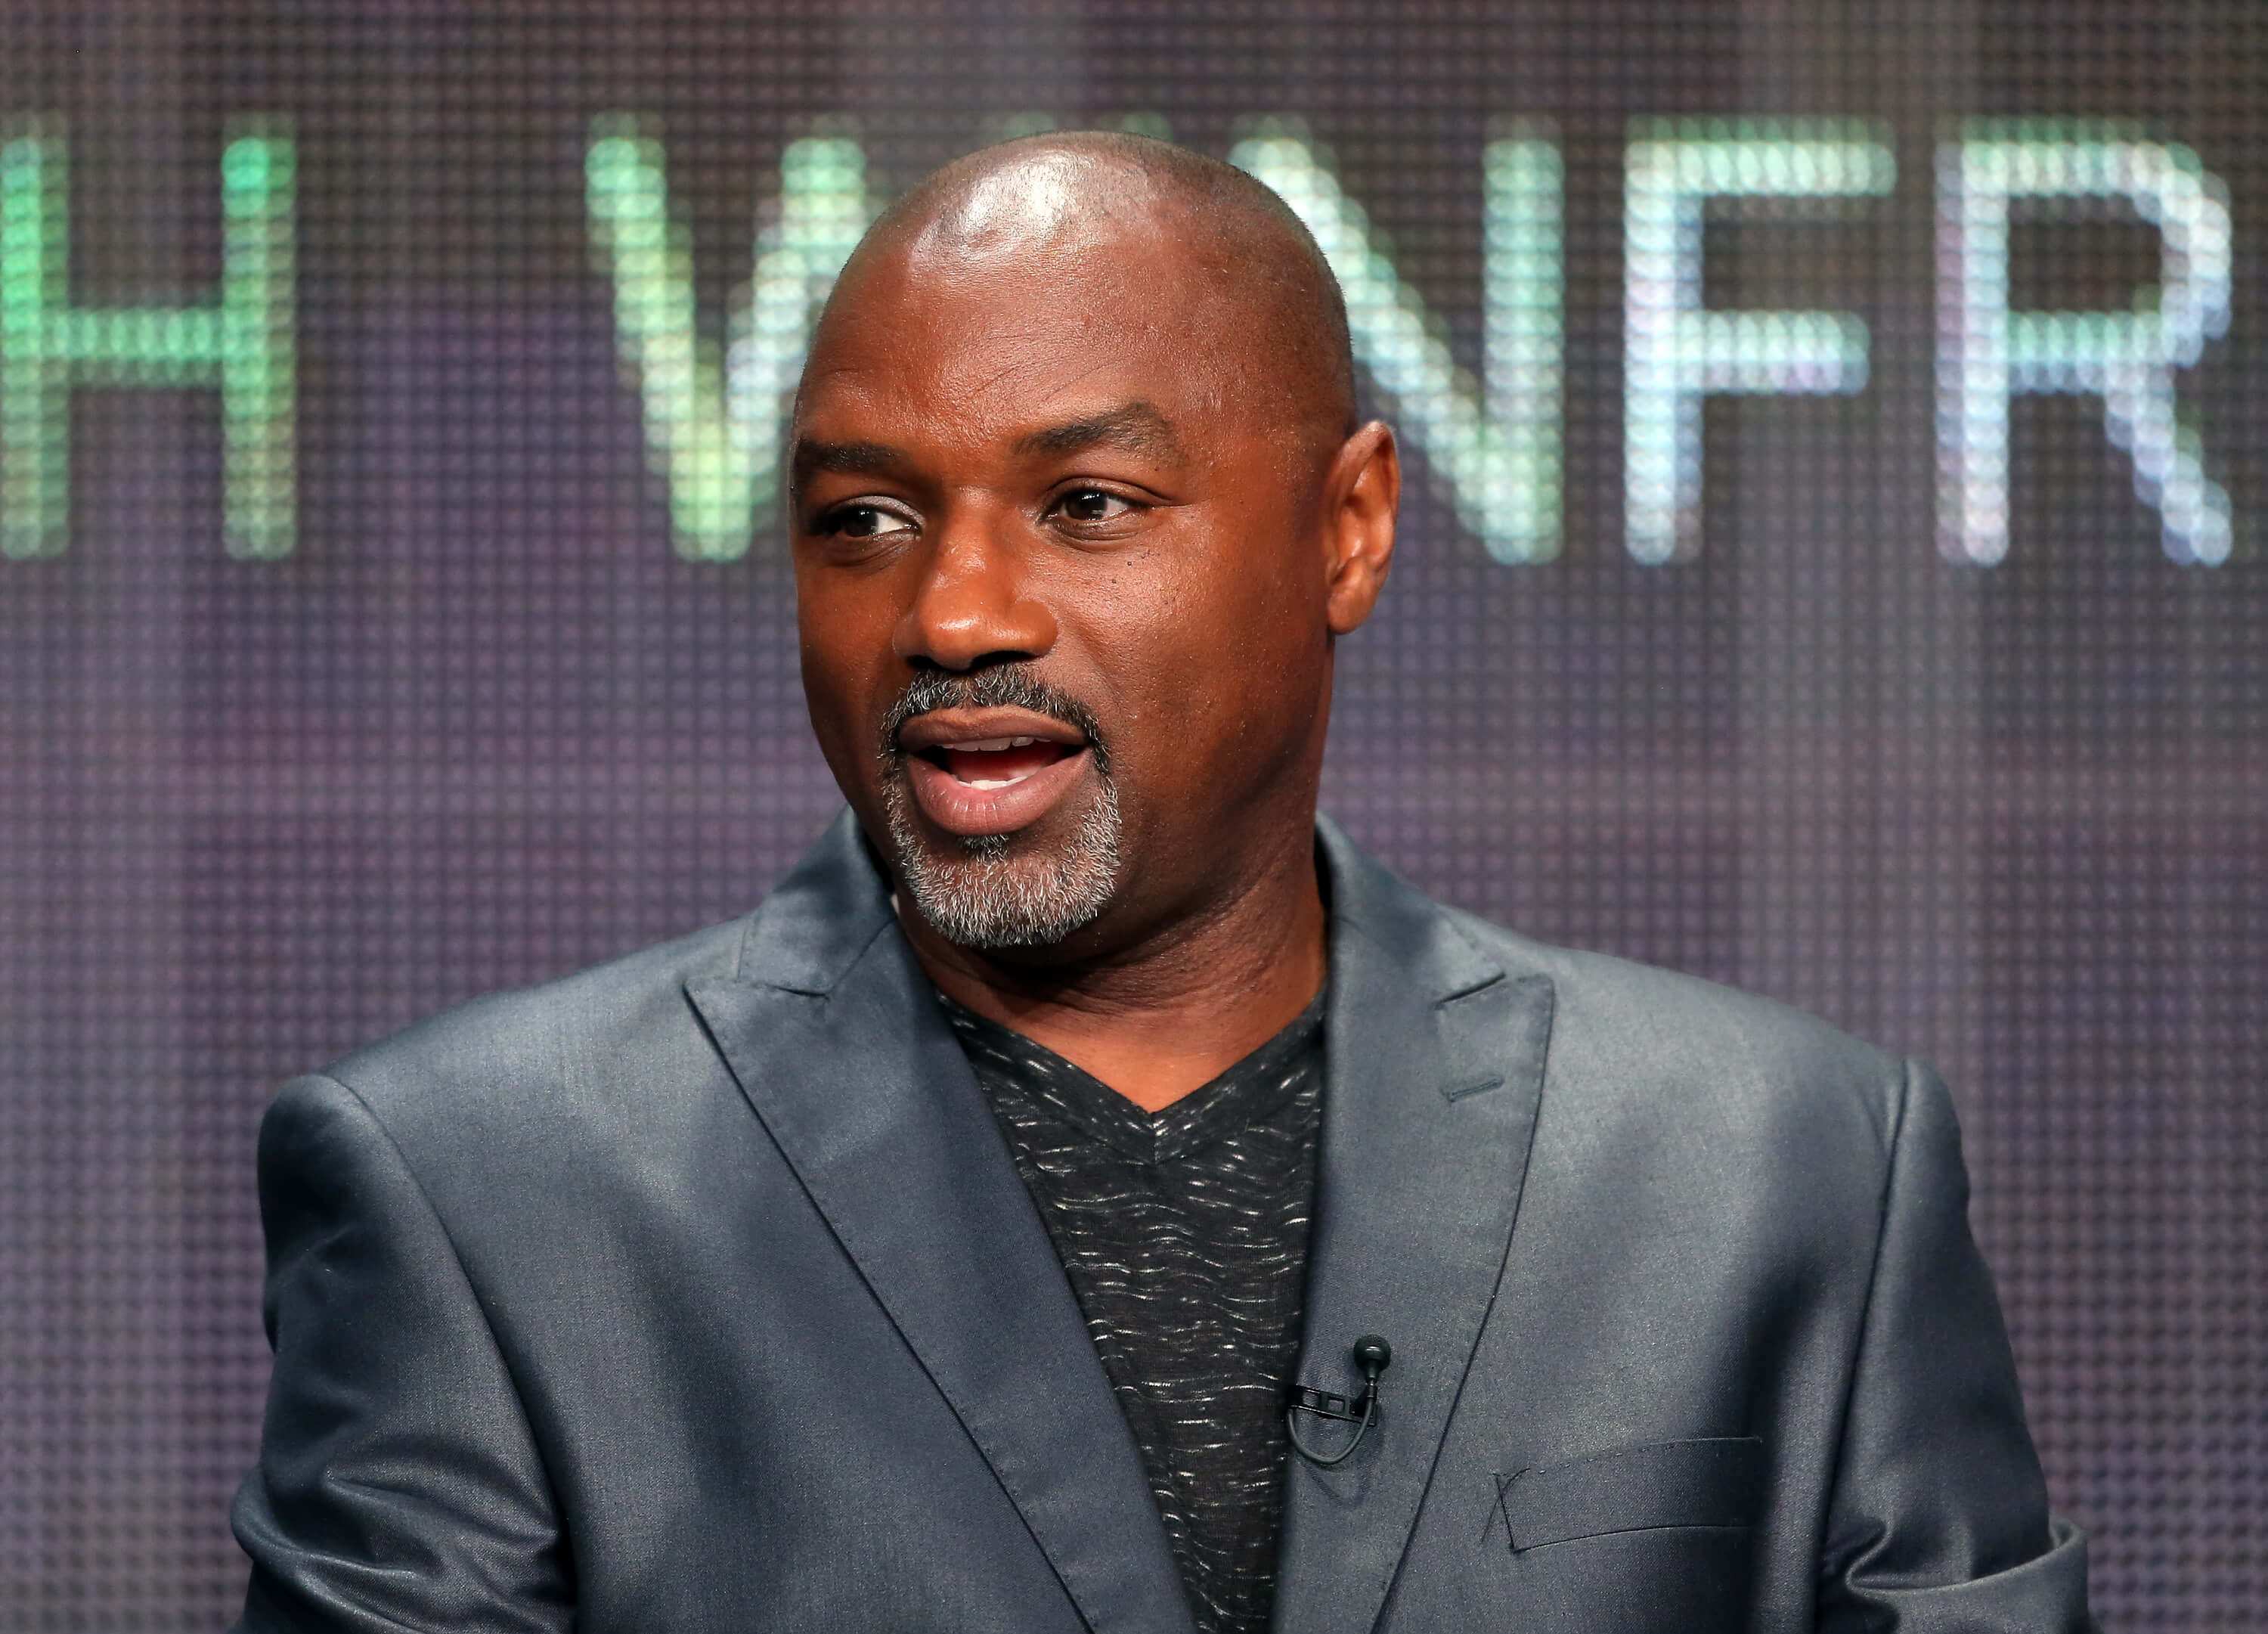 'Passions' star Rodney Van Johnson dressed in a grey suit, speaking during a panel discussion.